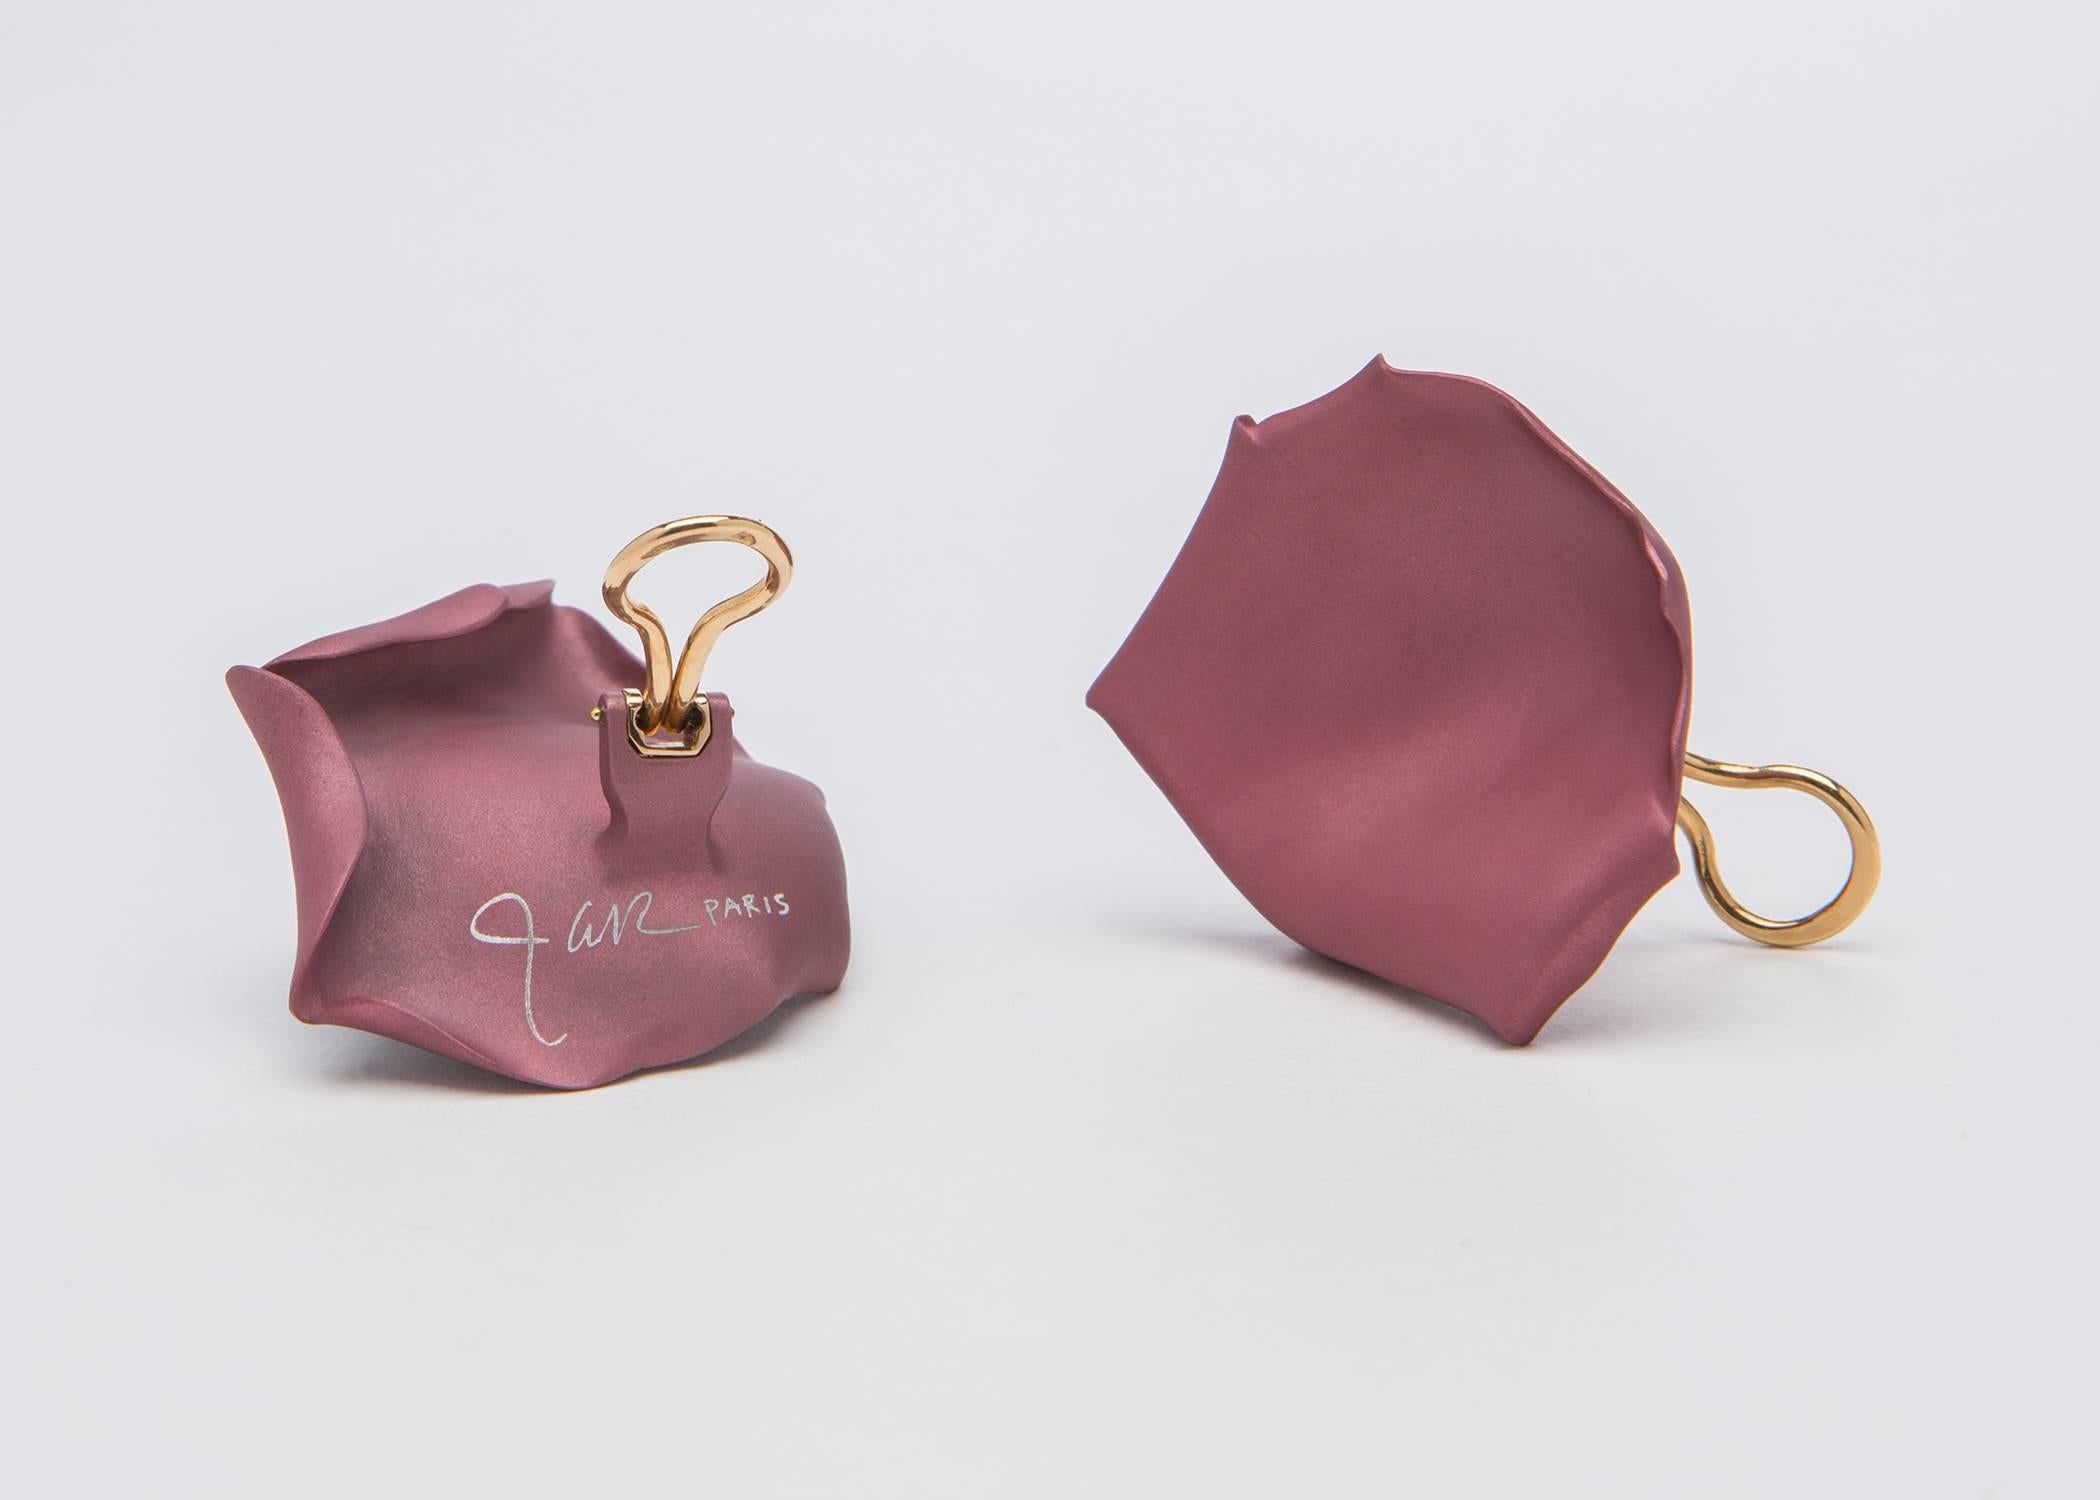 The only living jewelry designer to be honored at the Metropolitan Museum of Art. JAR ( Joel Arthur Rosenthal ) creates wearable sculpture with the simple shape of a rose petal. Rare and collectable. Original suede pouch, never worn. Approximately 1